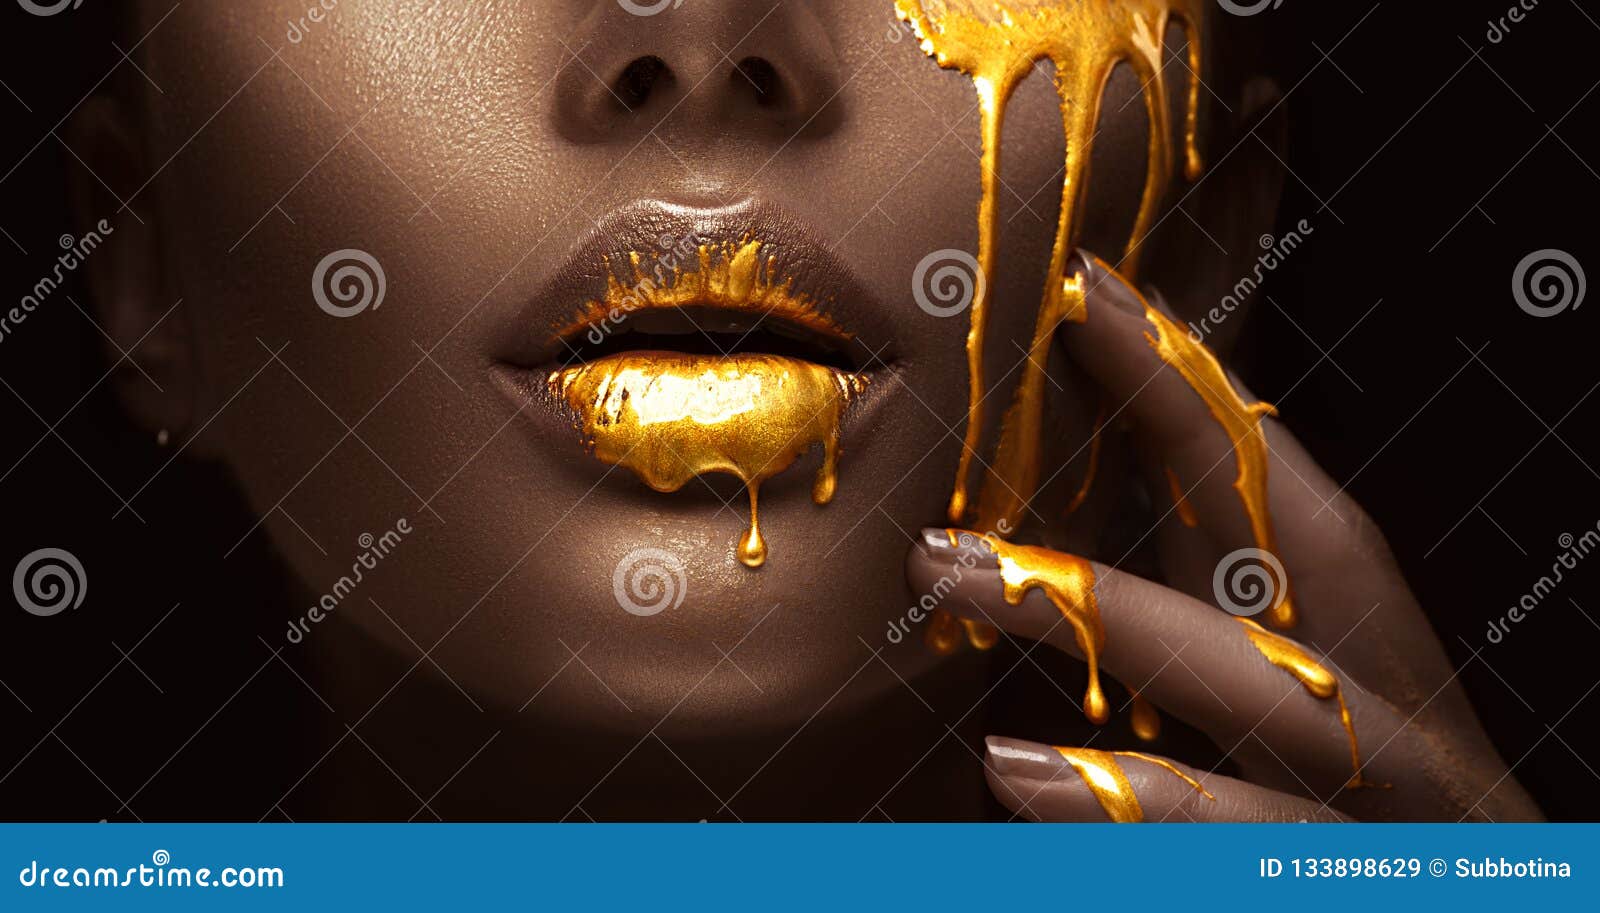 golden paint smudges drips from the face lips and hand, golden liquid drops on beautiful model girl`s mouth, creative makeup